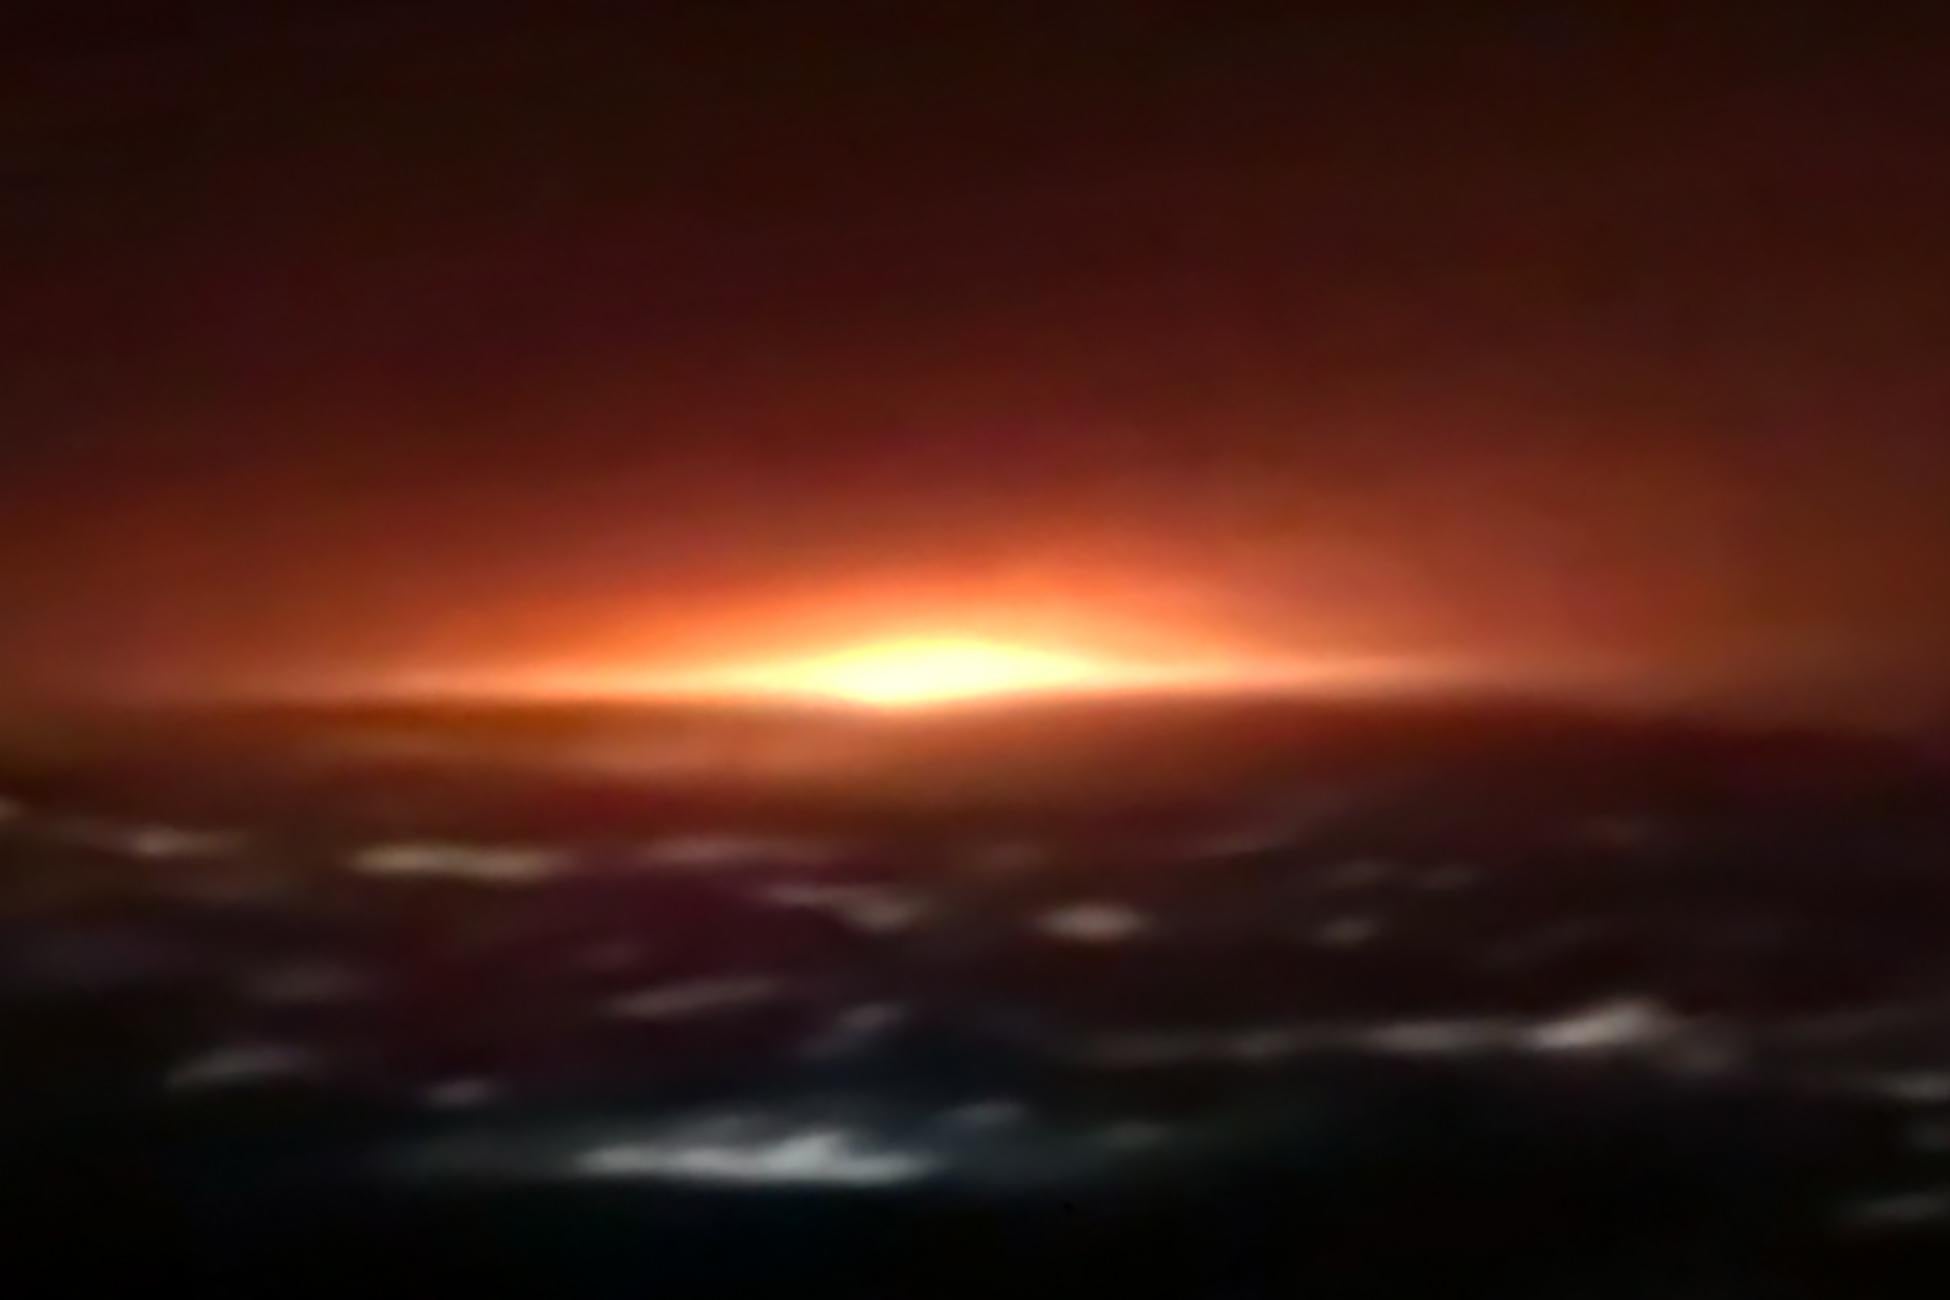 Blurry screen capture of an explosion in the night sky.